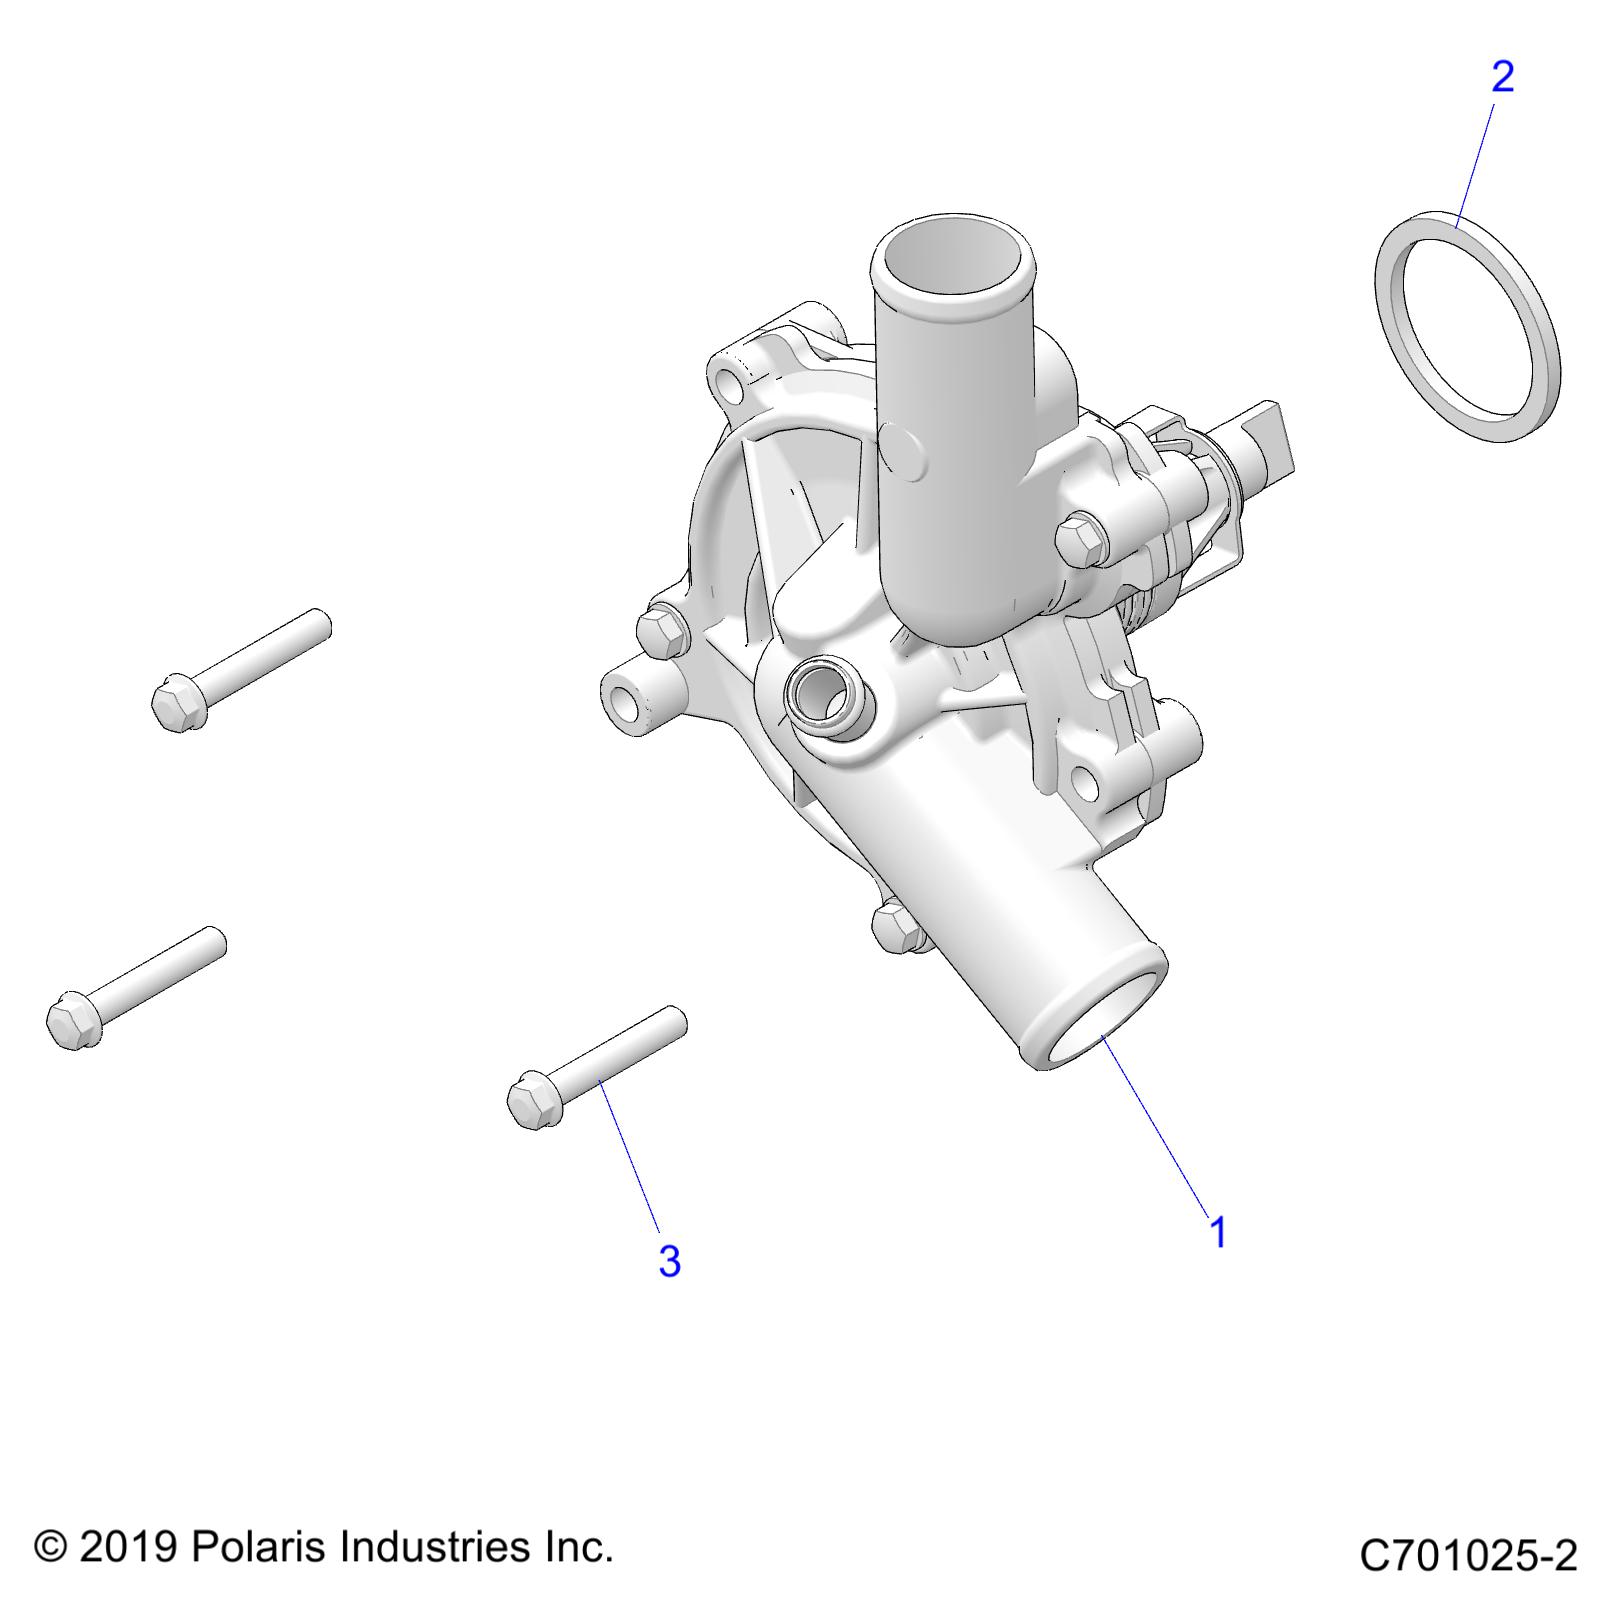 Part Number : 1205015 WATERPUMP ASSEMBLY